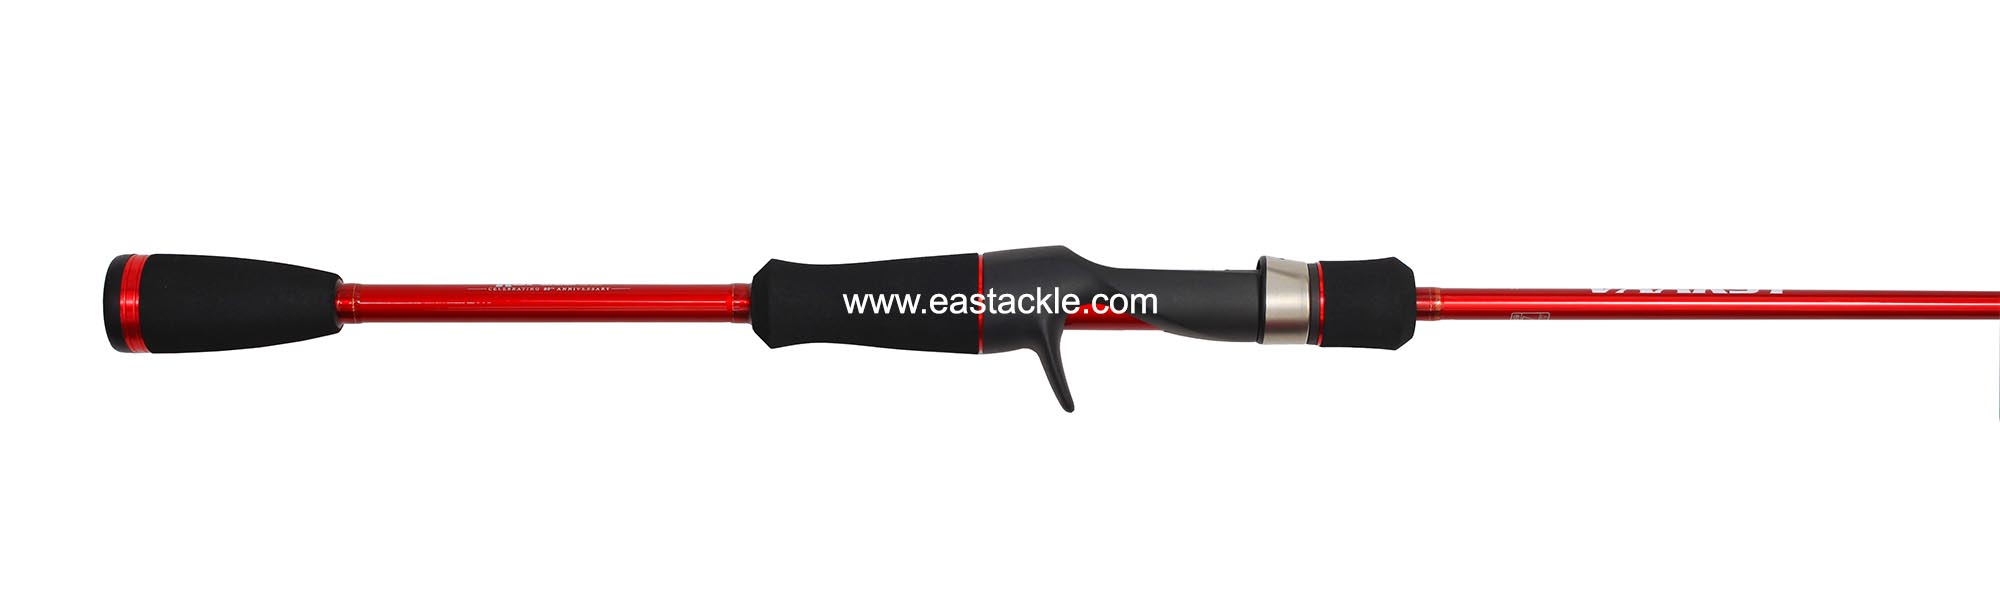 Rapala - Vaaksy - 80th Anniversary - VAC662M - Bait Casting Rod - Butt to Stripper Guide (Side View) | Eastackle